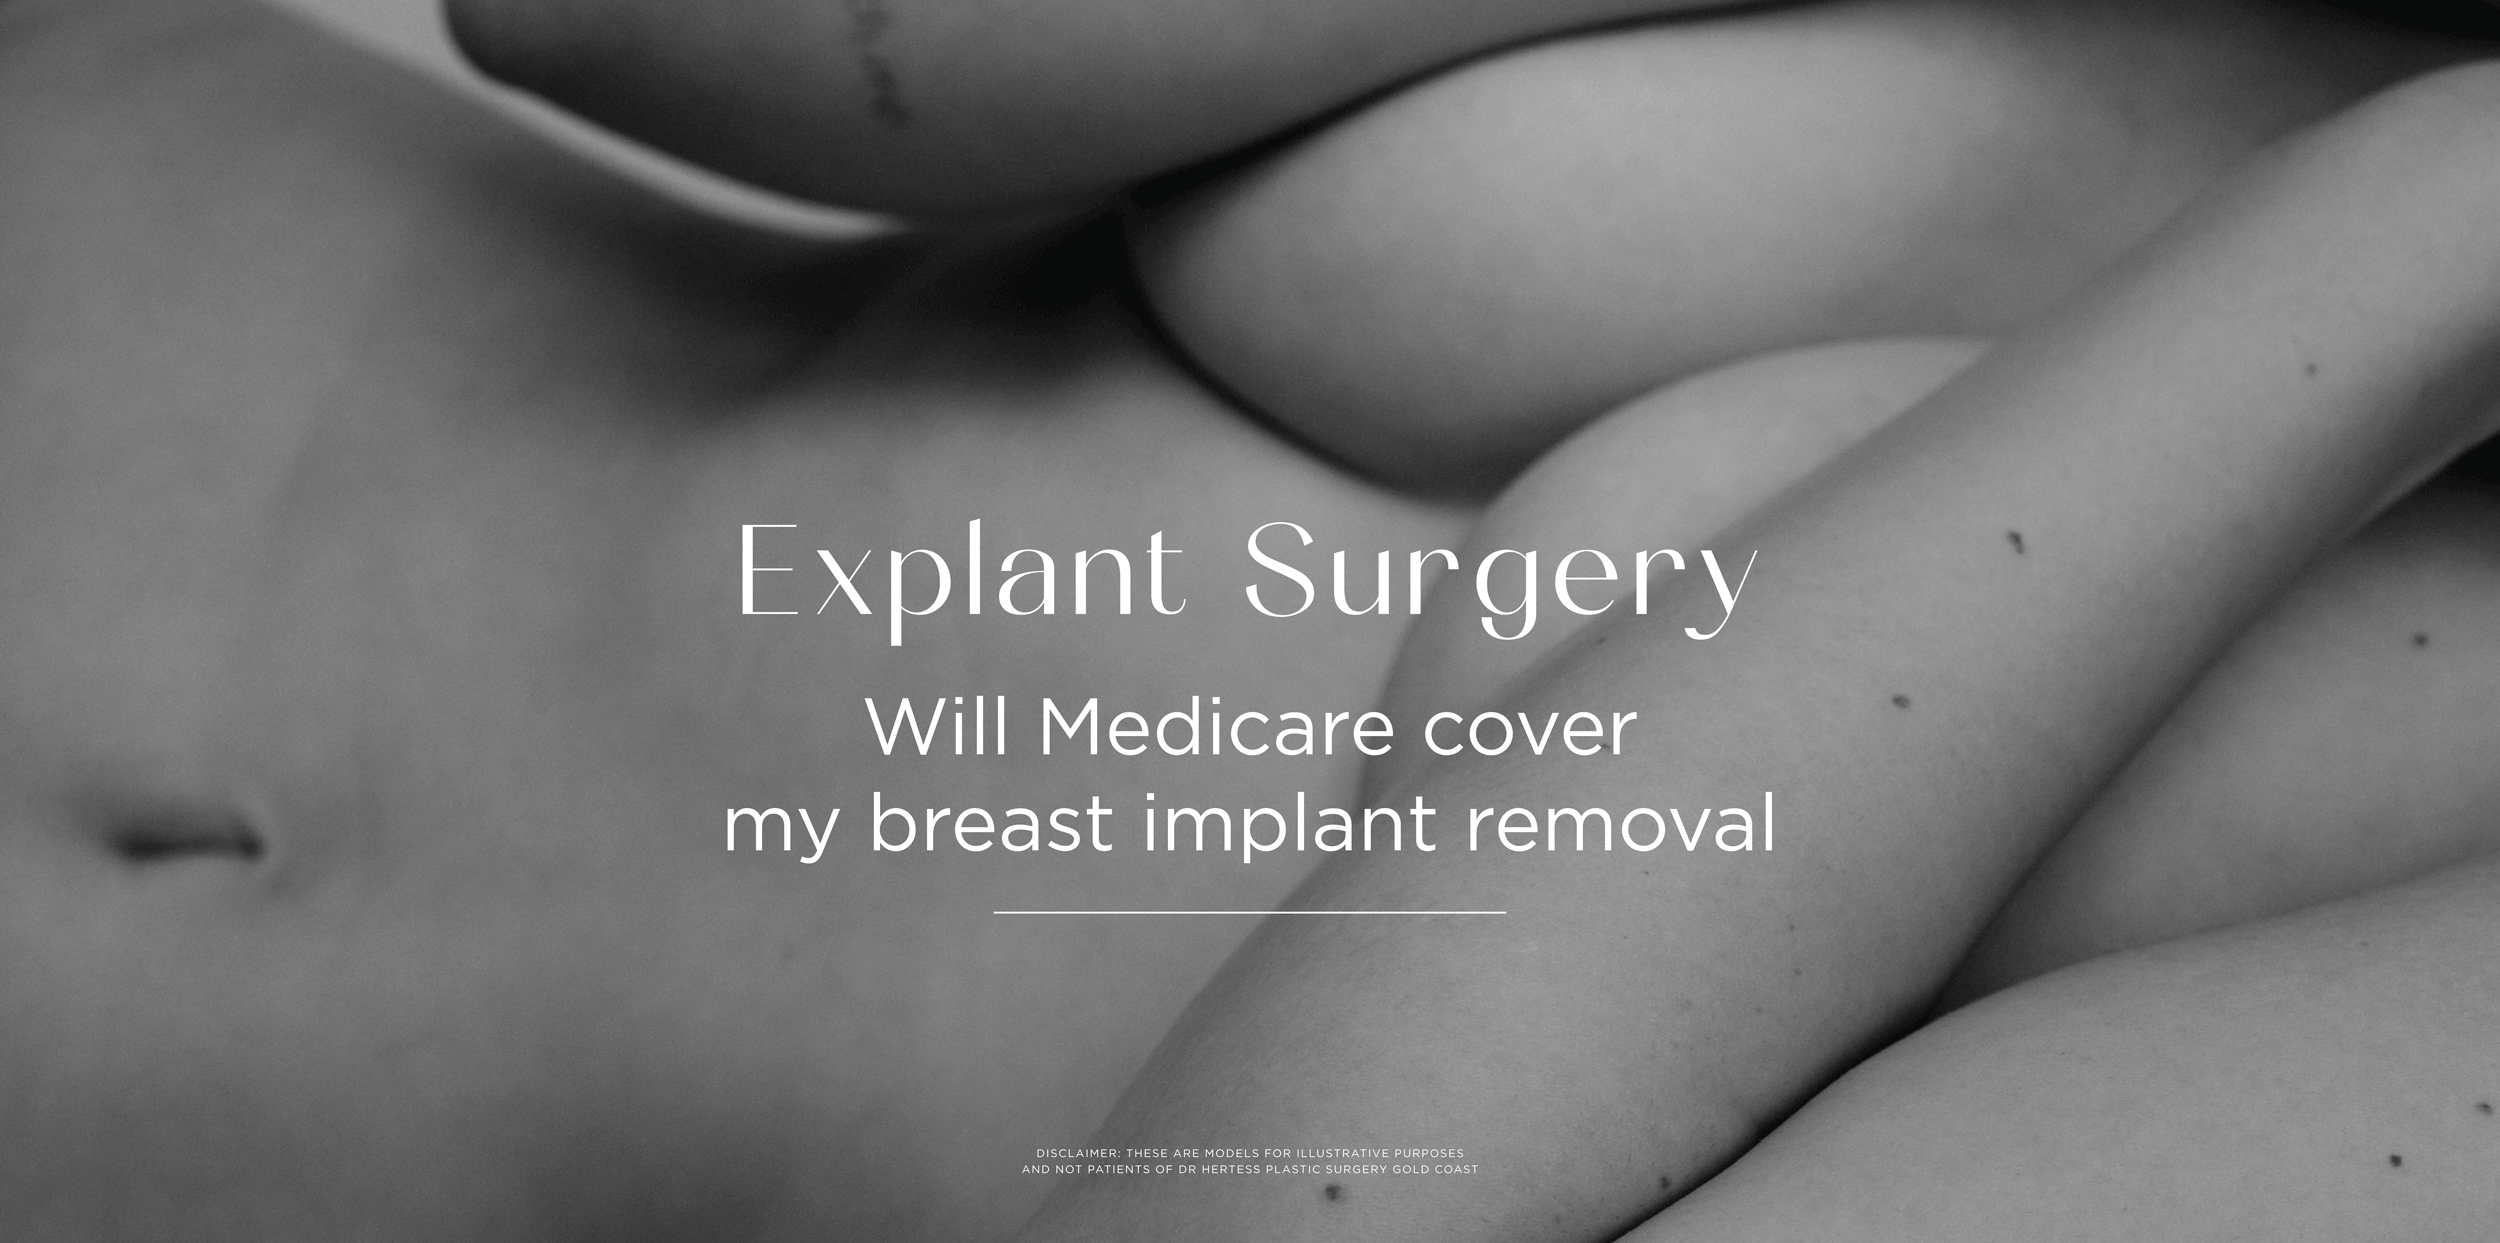 Will Medicare cover my implant removal?